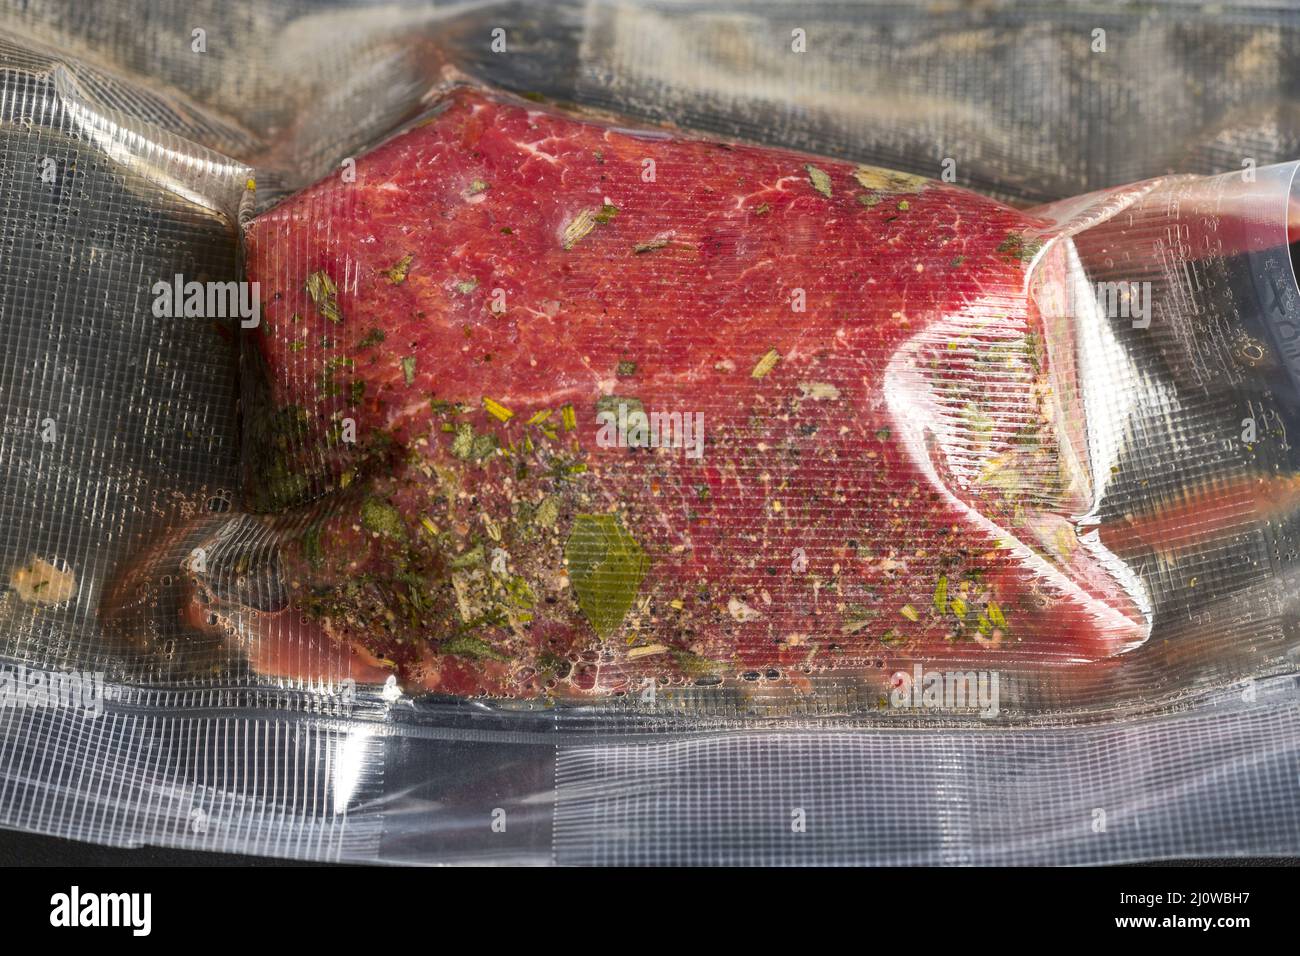 Beef in sous vide bag Stock Photo